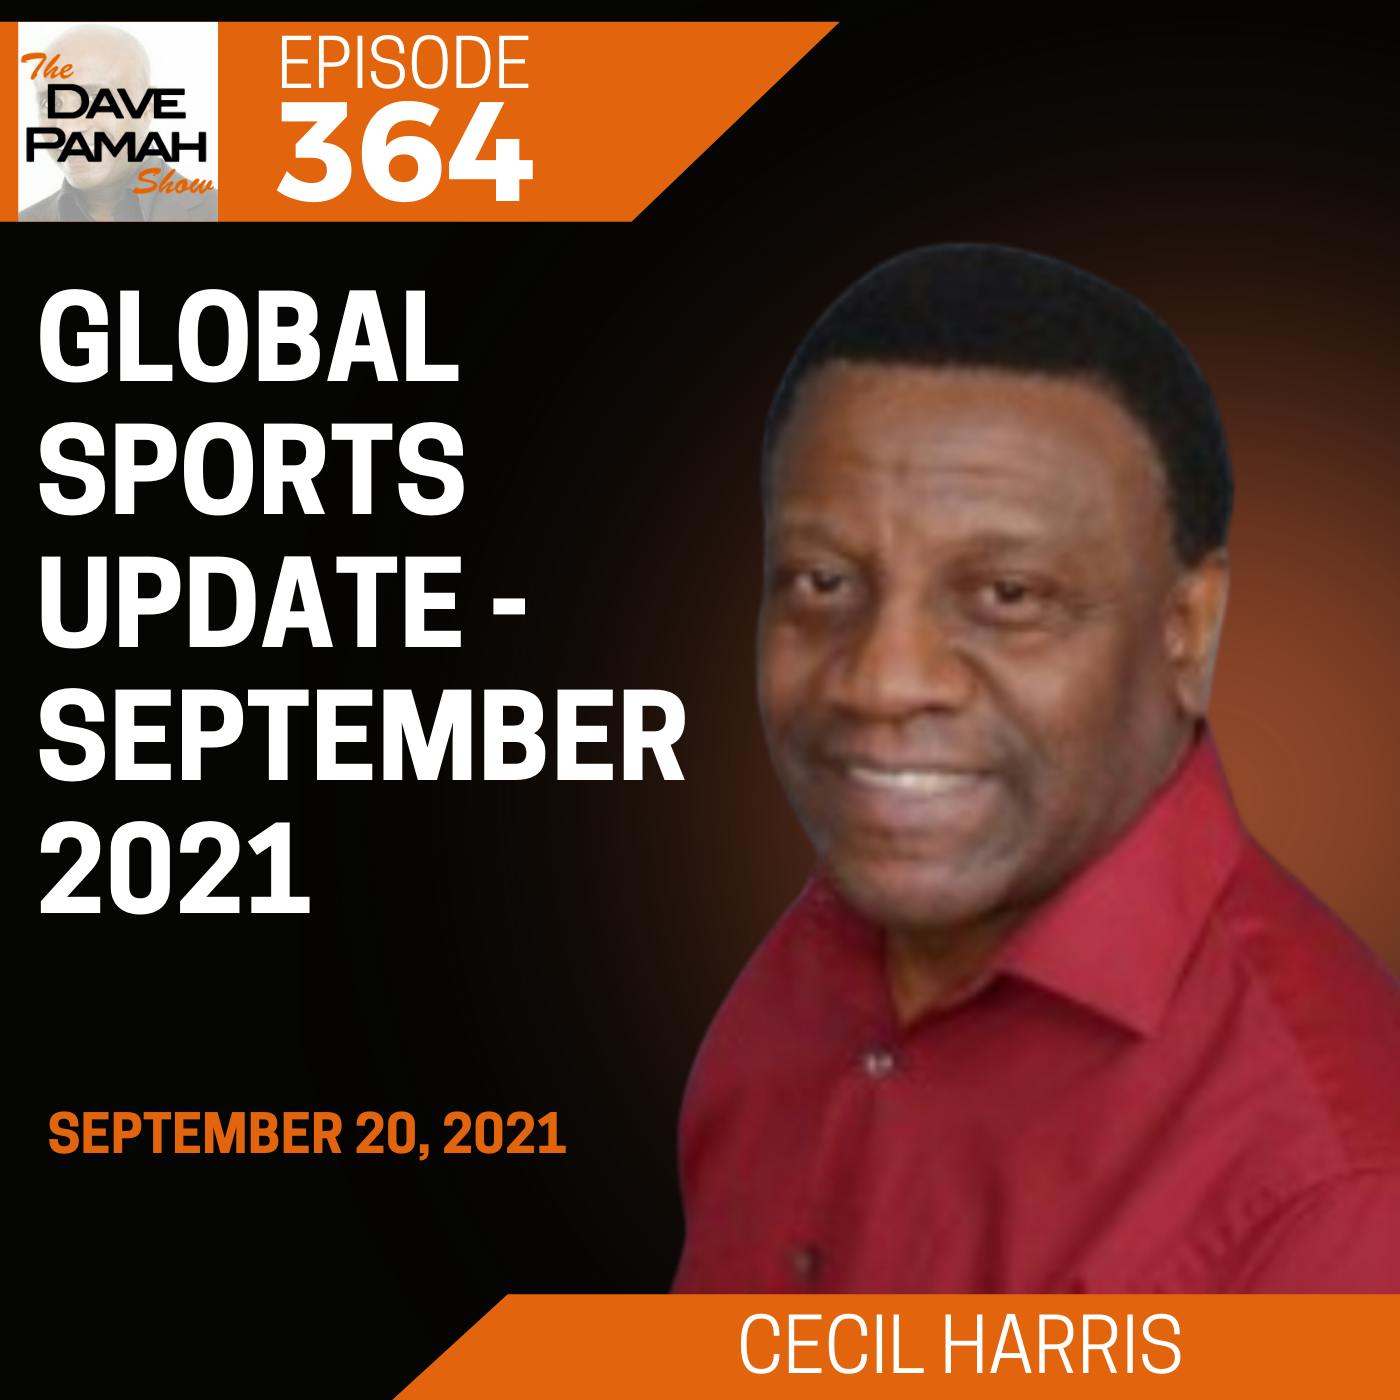 Global Sports Update - September 2021 with Cecil Harris Image